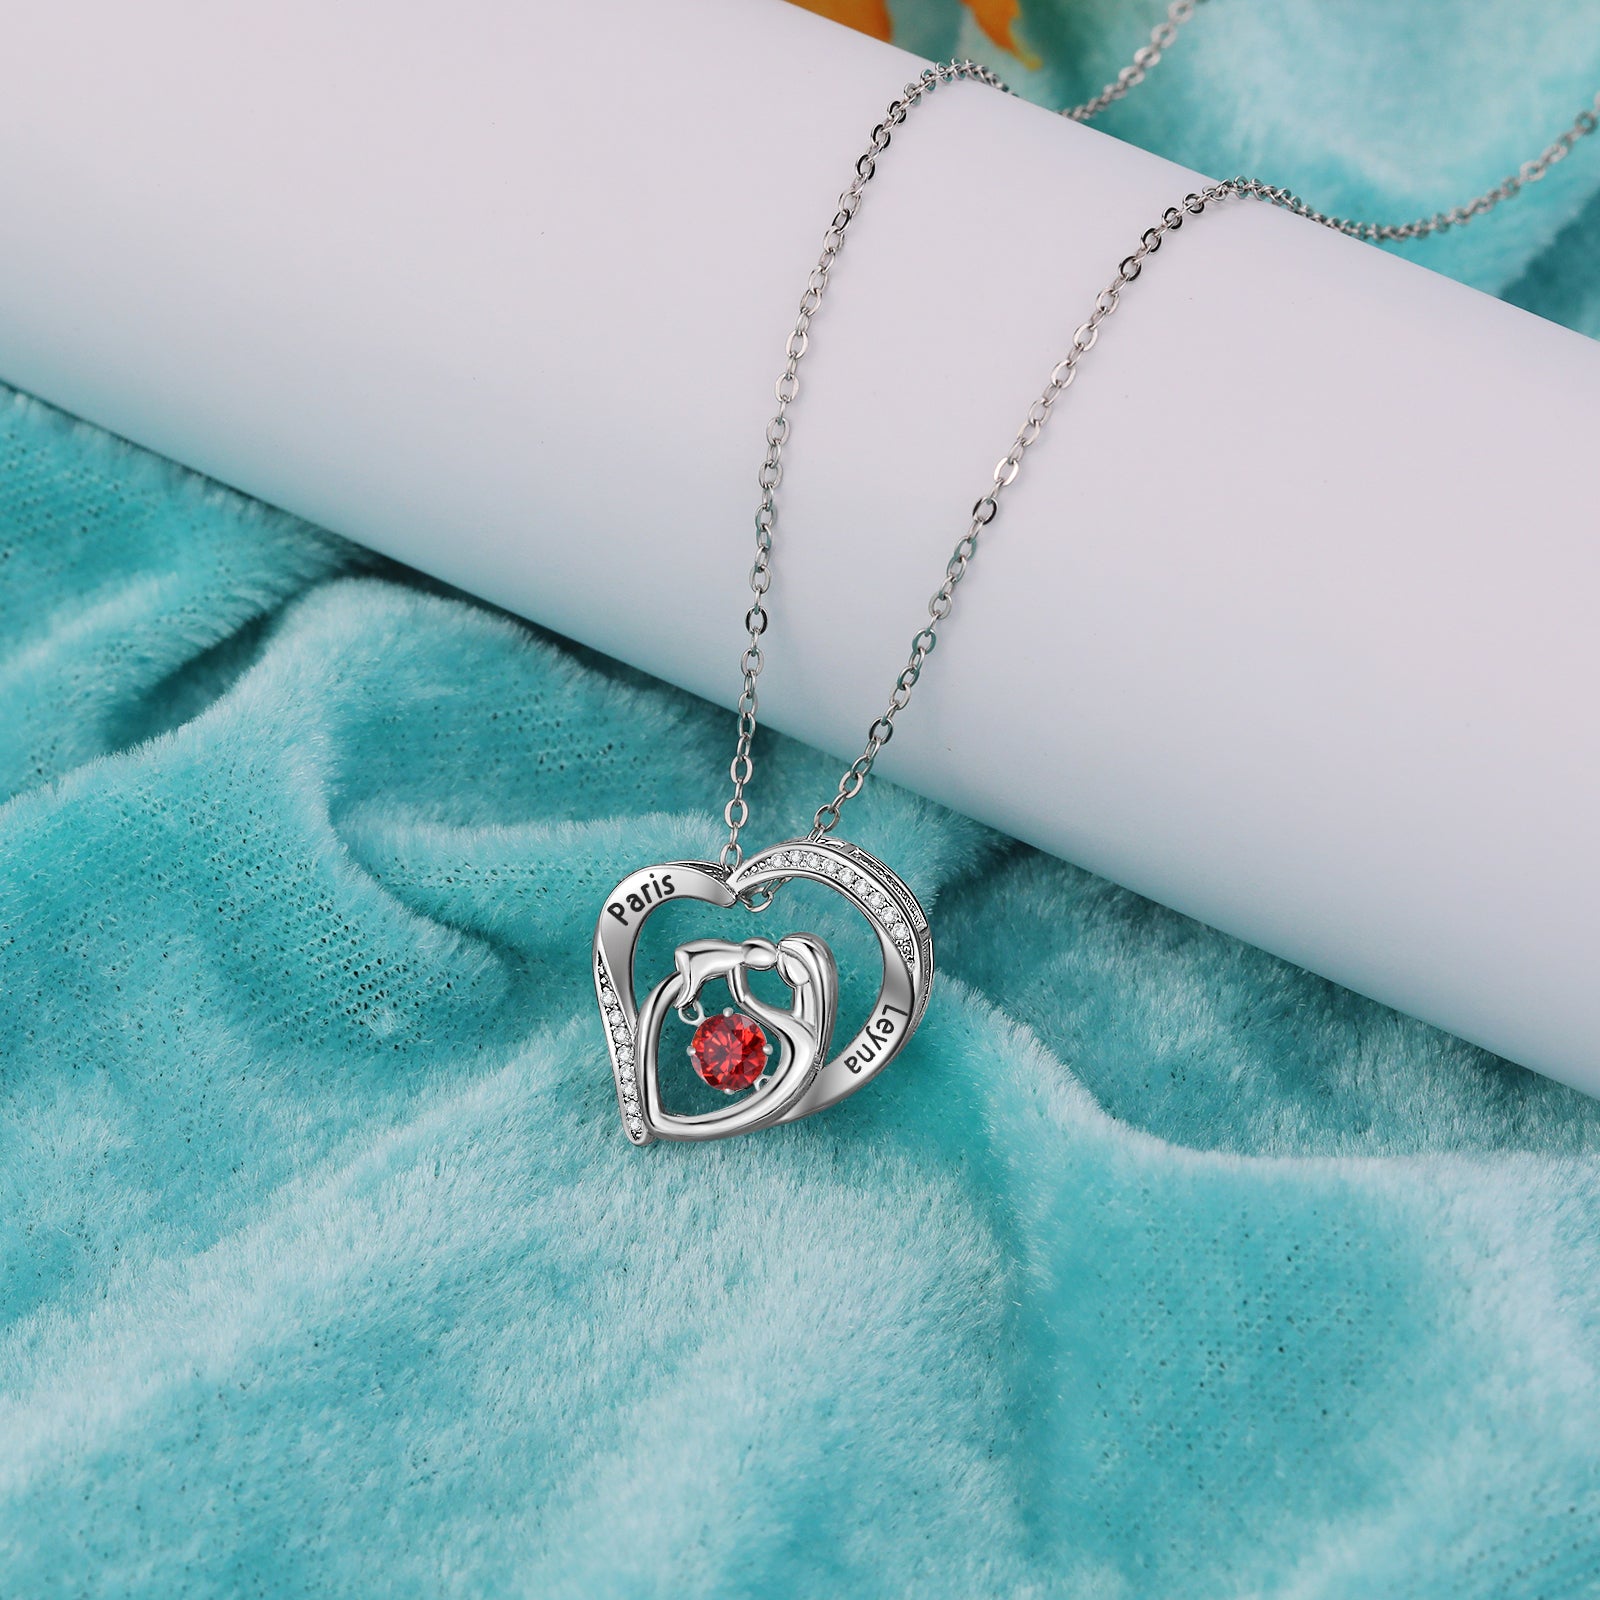 Custom Heart Necklace Mother and Son/Daughter With Birthstone and Engraved Names